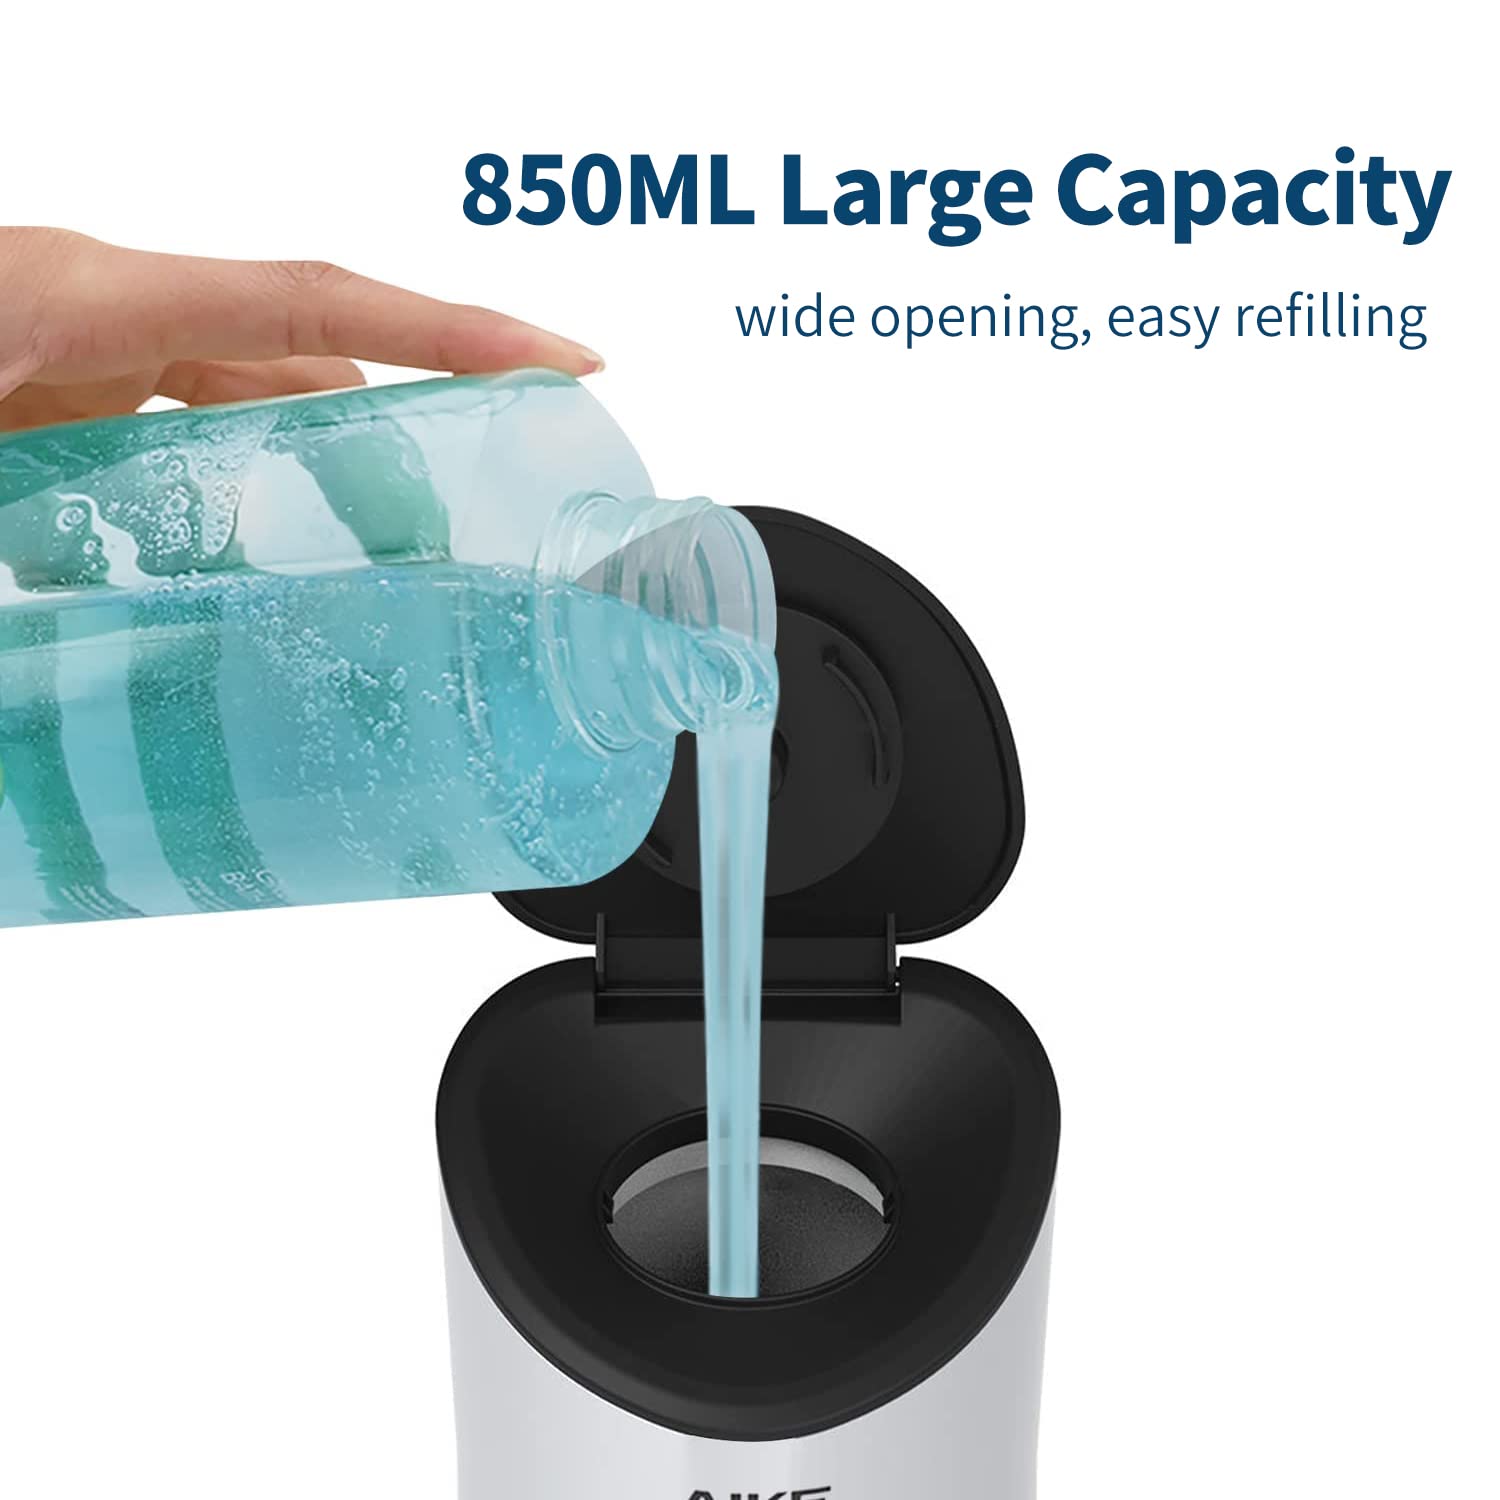 AIKE Wall Mounted Commercial Automatic Soap Dispenser 28OZ/850ml, Model AK1210 Product Image